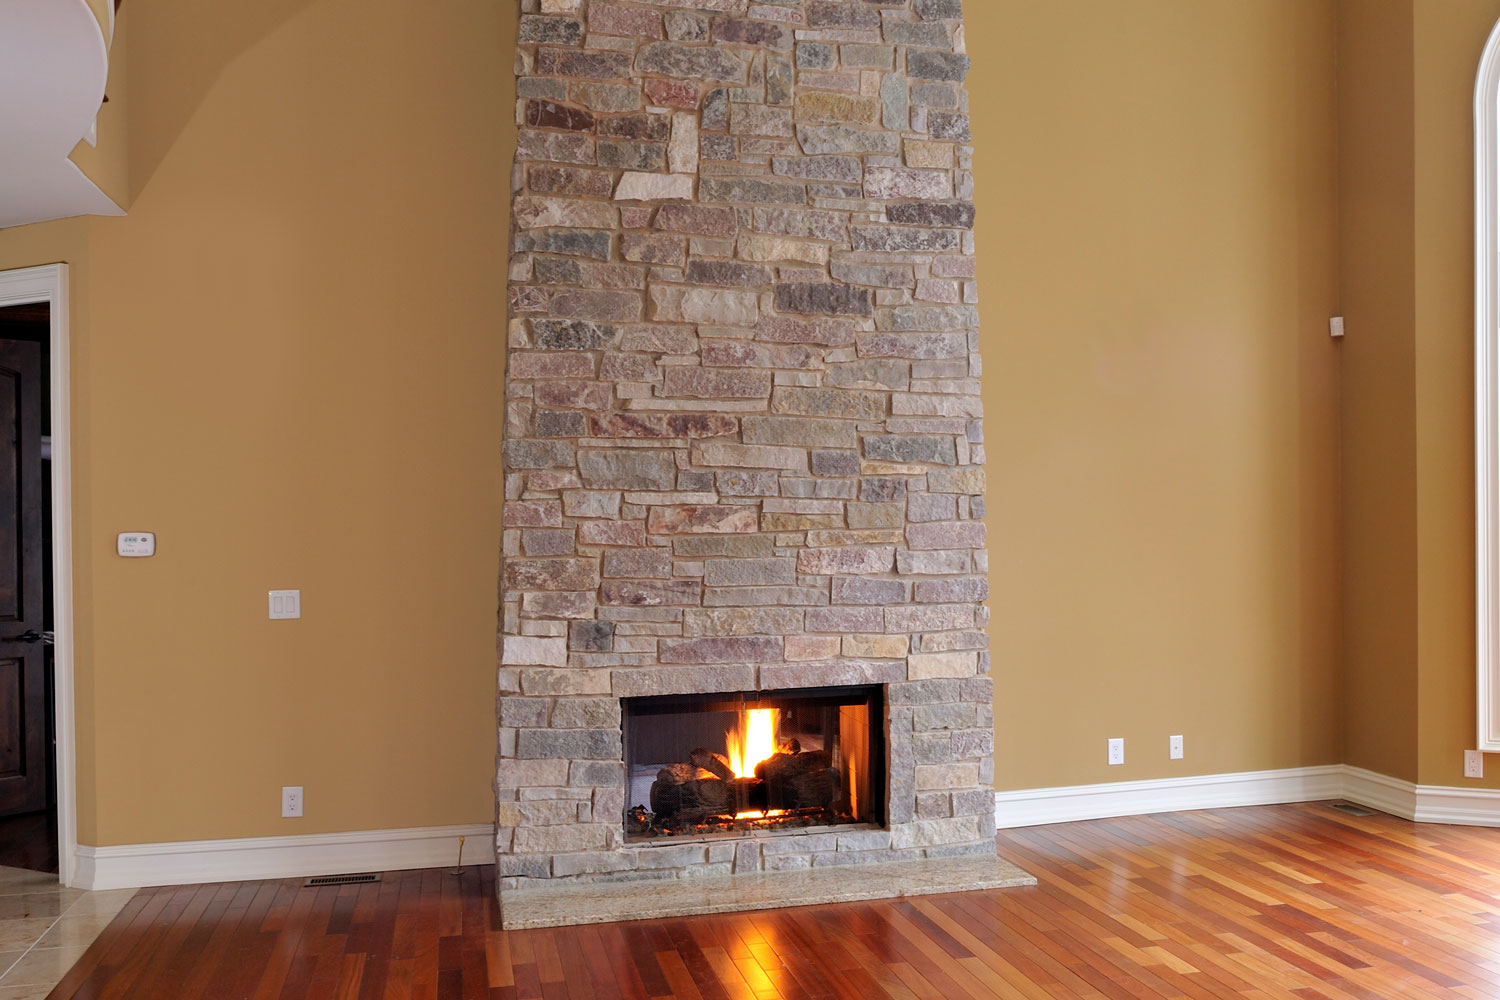 A gorgeous stone cladding fireplace in the living room with wooden flooring and tan walls